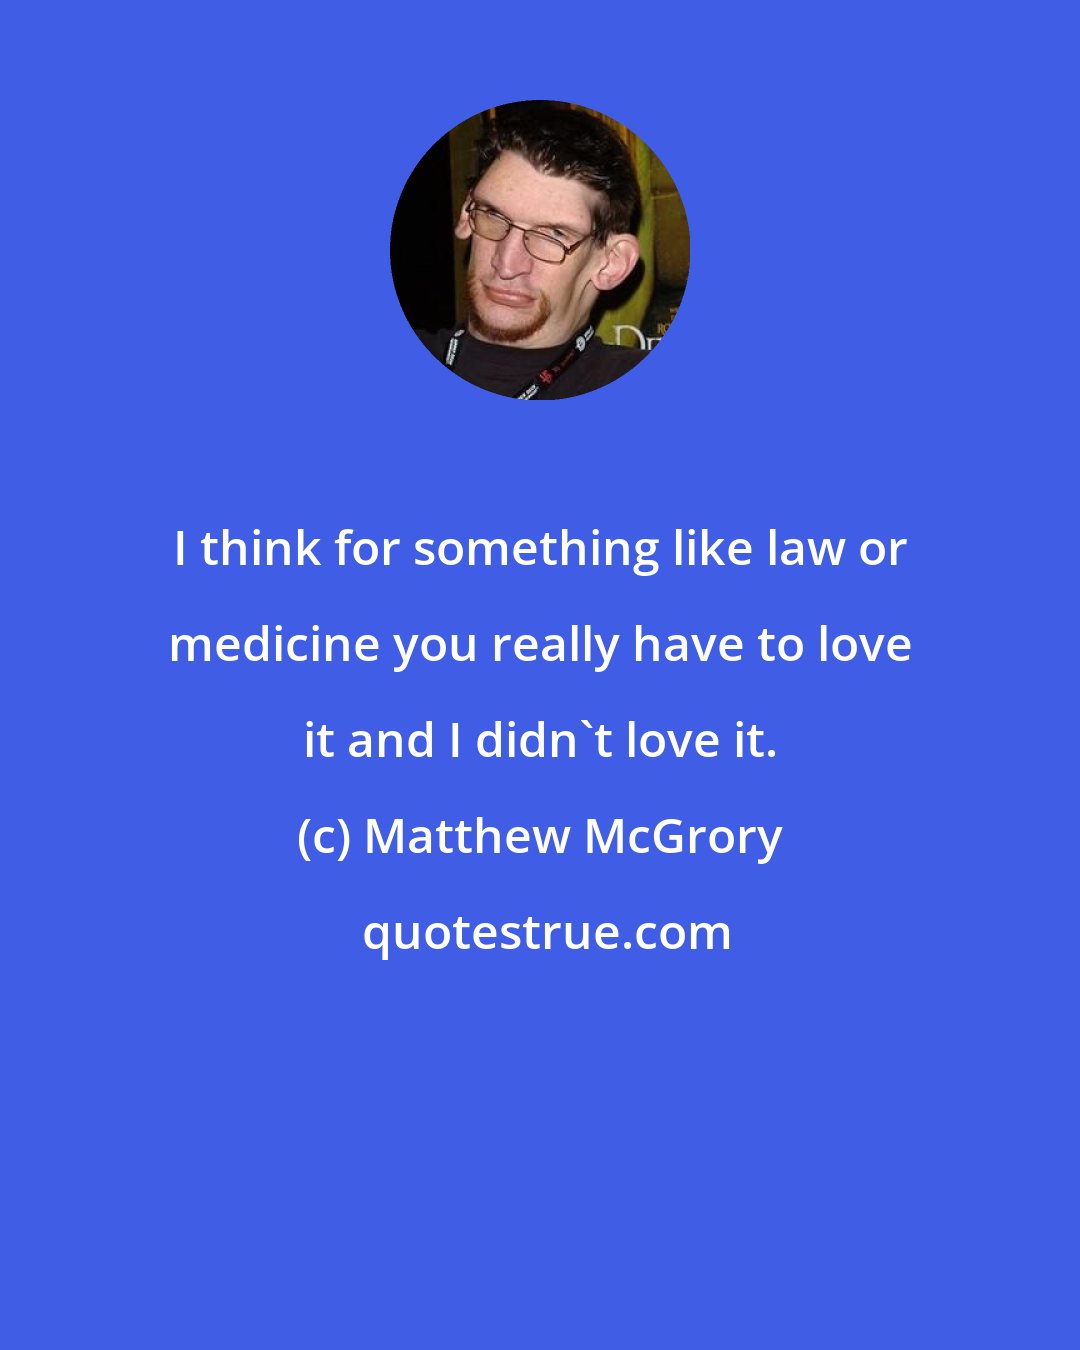 Matthew McGrory: I think for something like law or medicine you really have to love it and I didn't love it.